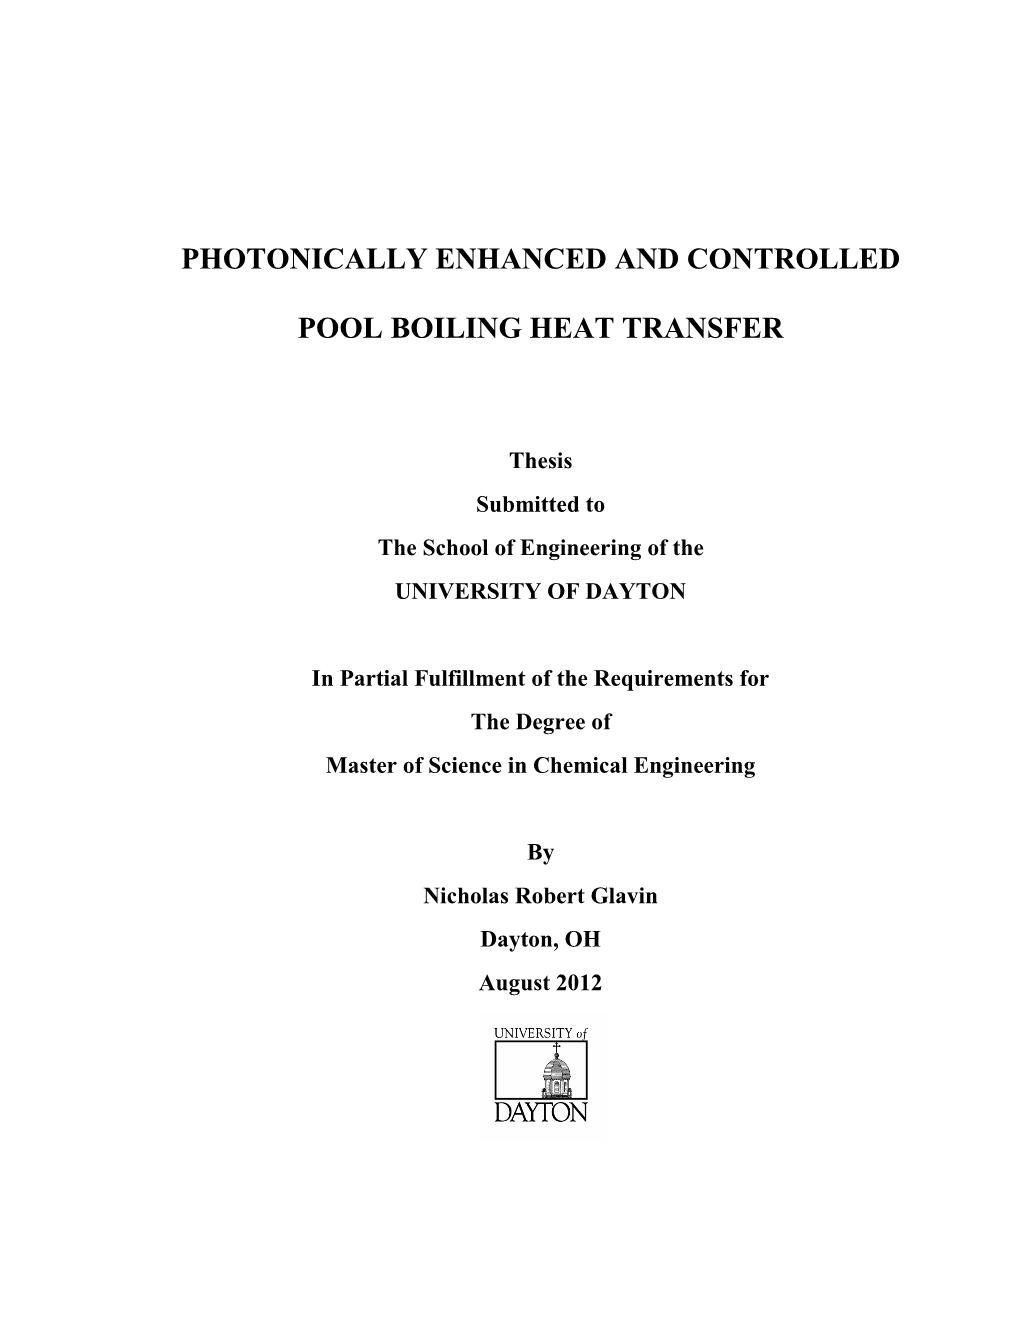 Photonically Enhanced and Controlled Pool Boiling Heat Transfer